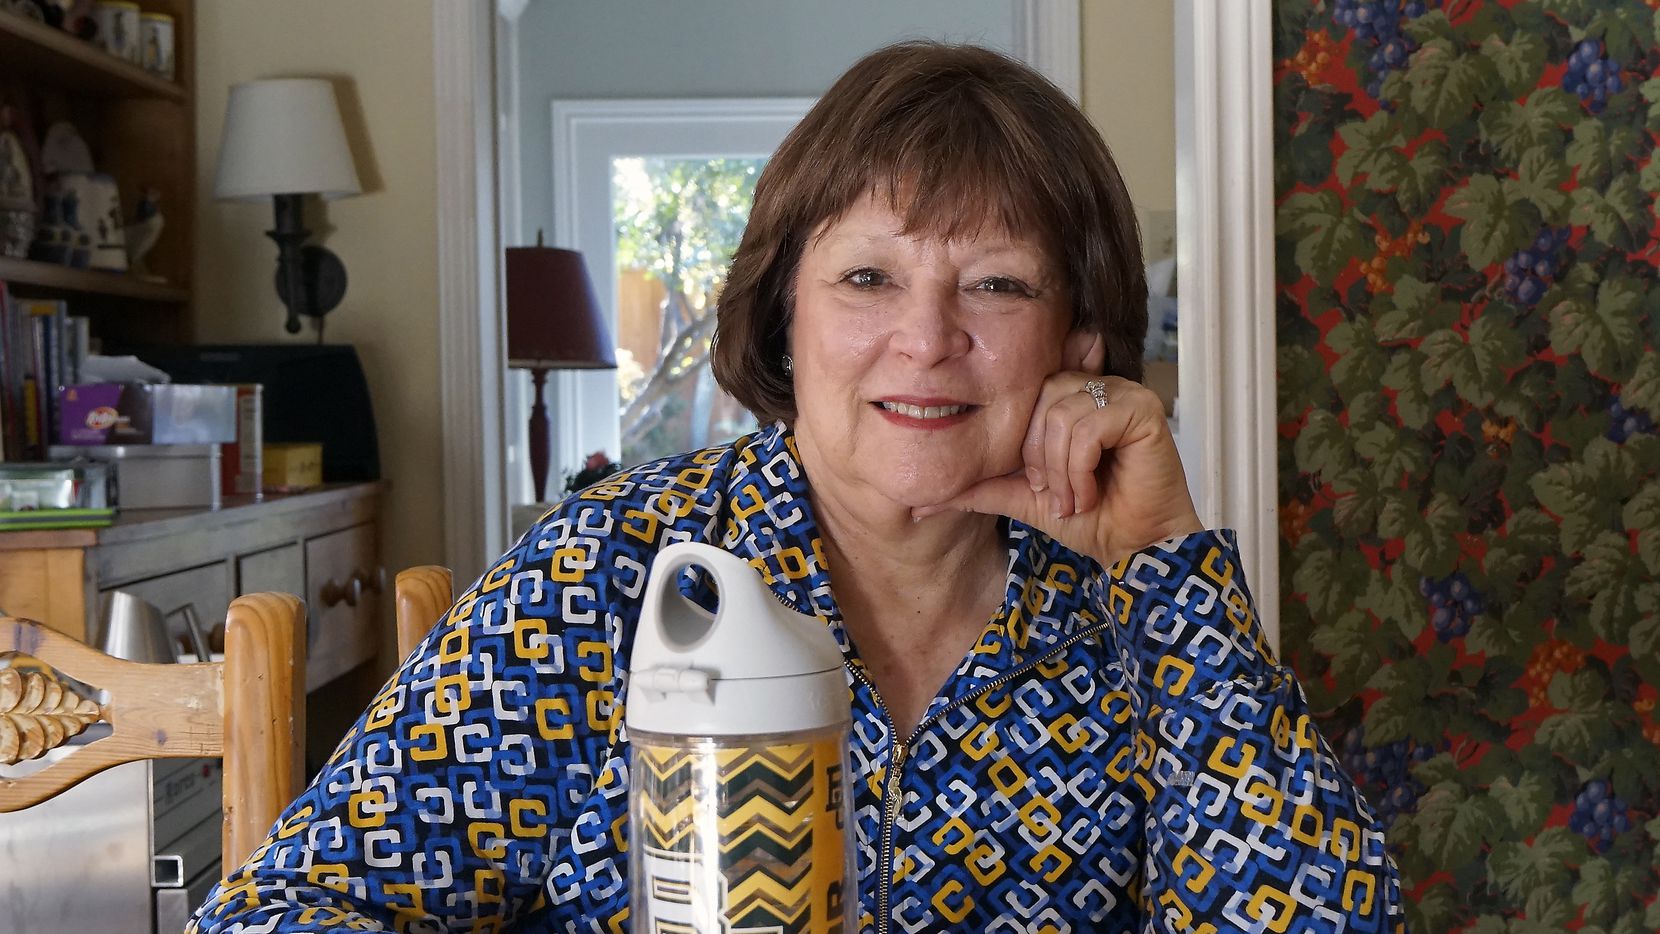 Bridget Bell, 65, of Dallas says drinking 72 ounces of water a day helps her feel full....